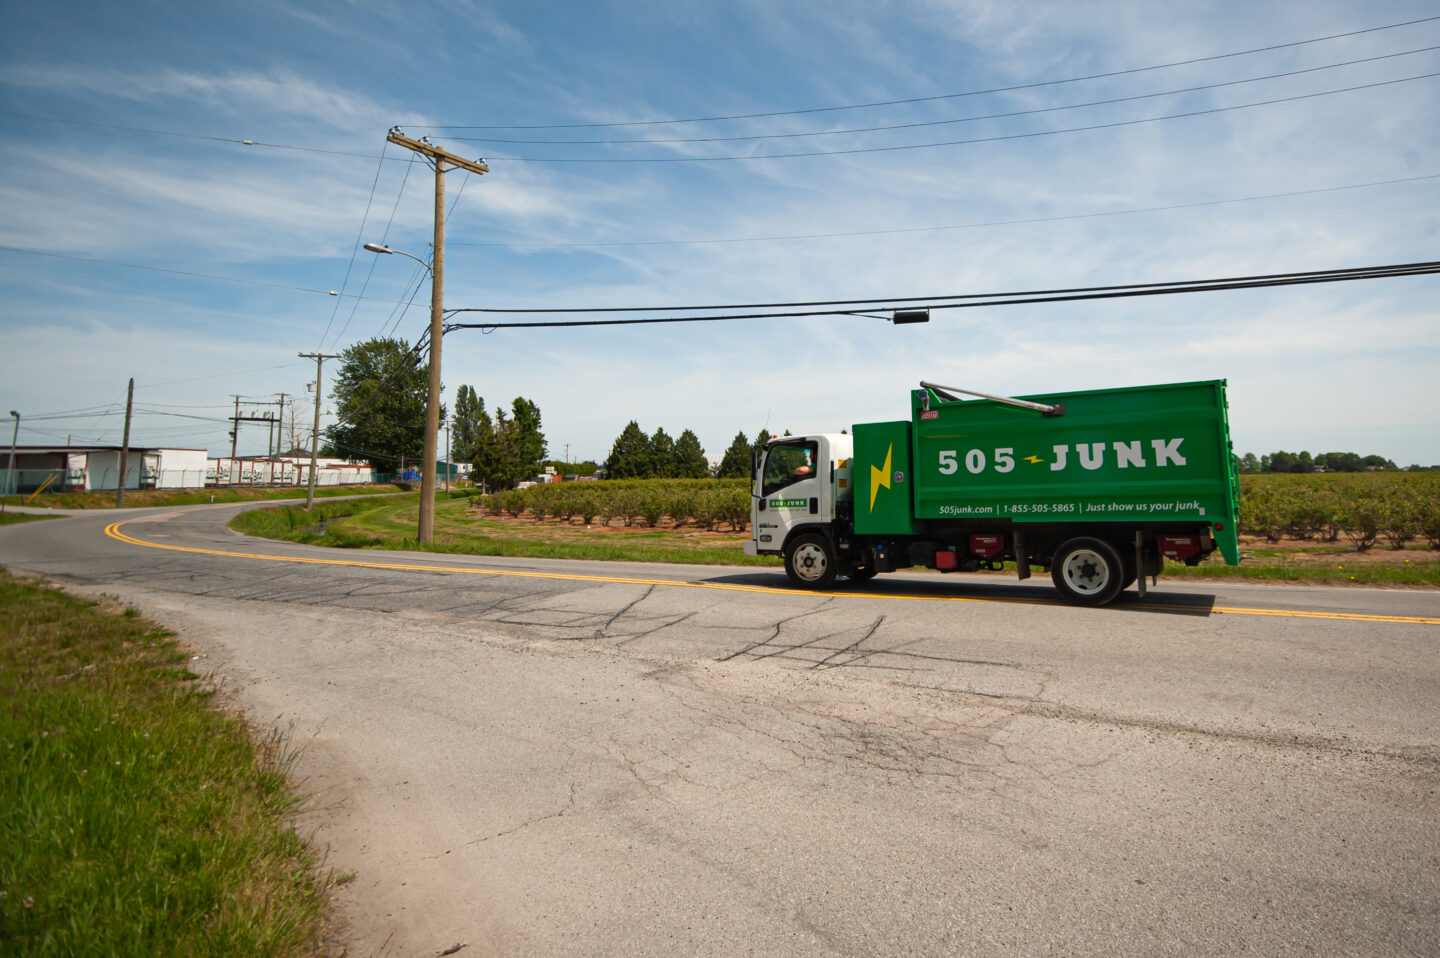 505-Junk truck driving in the back roads